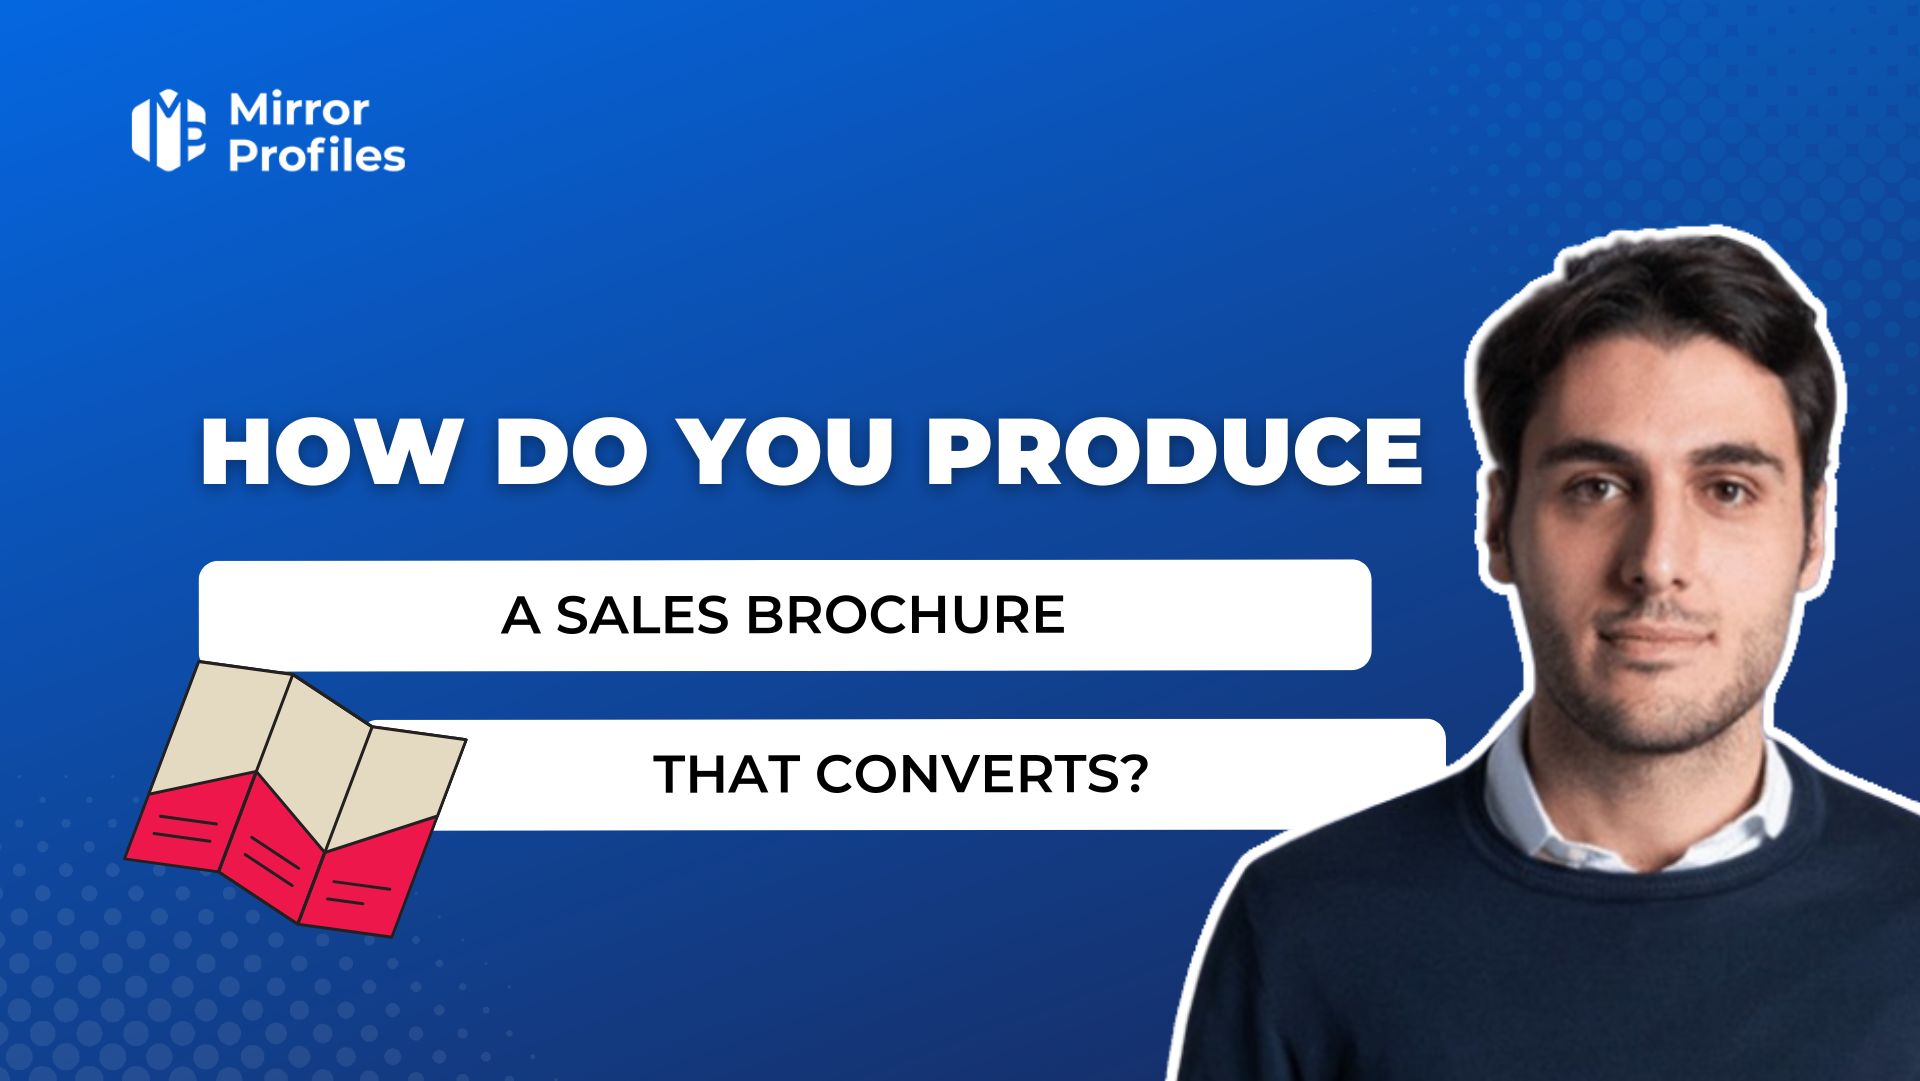 How do you produce a sales brochure that converts?